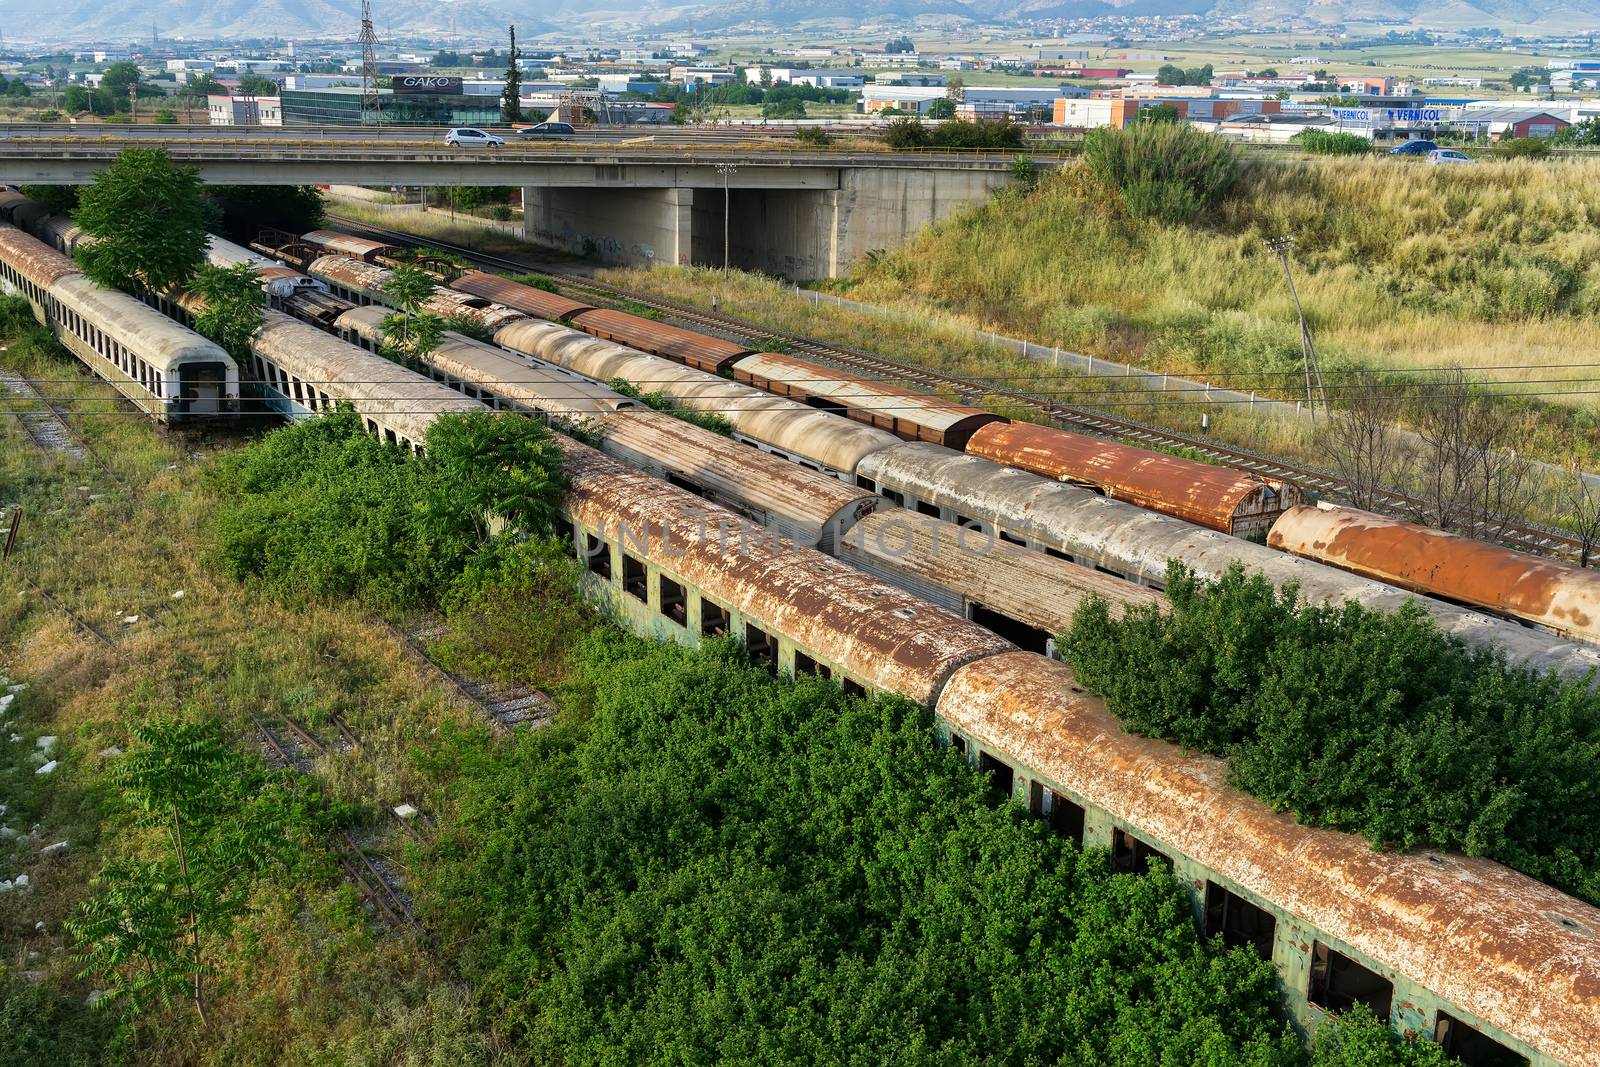 Aerial view of cemetery trains in Nea Ionia, Thessaloniki